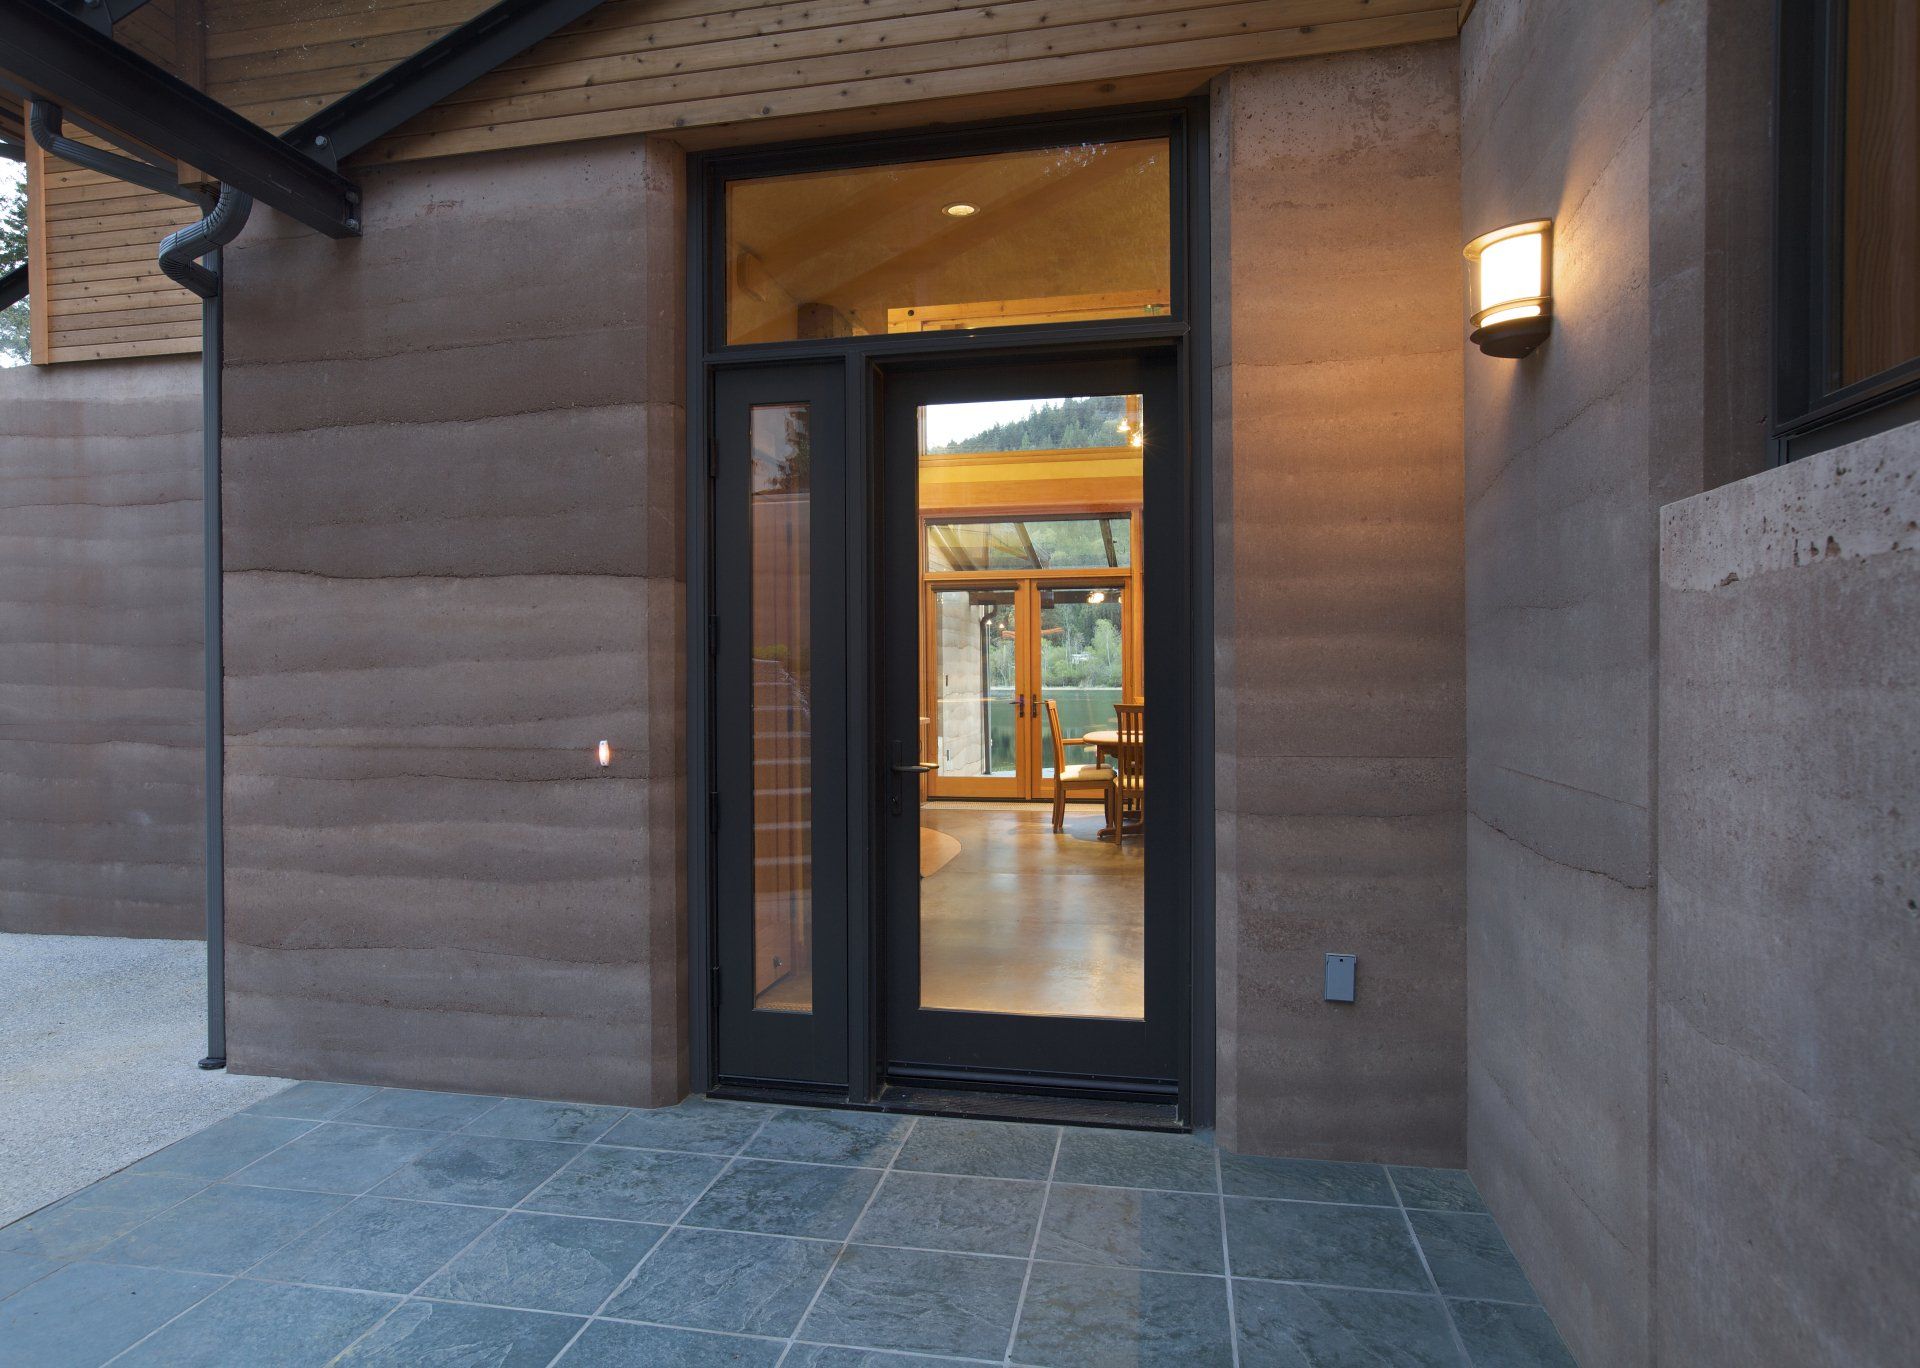 Grierson house front entrance with large glass doors and rammed earth walls